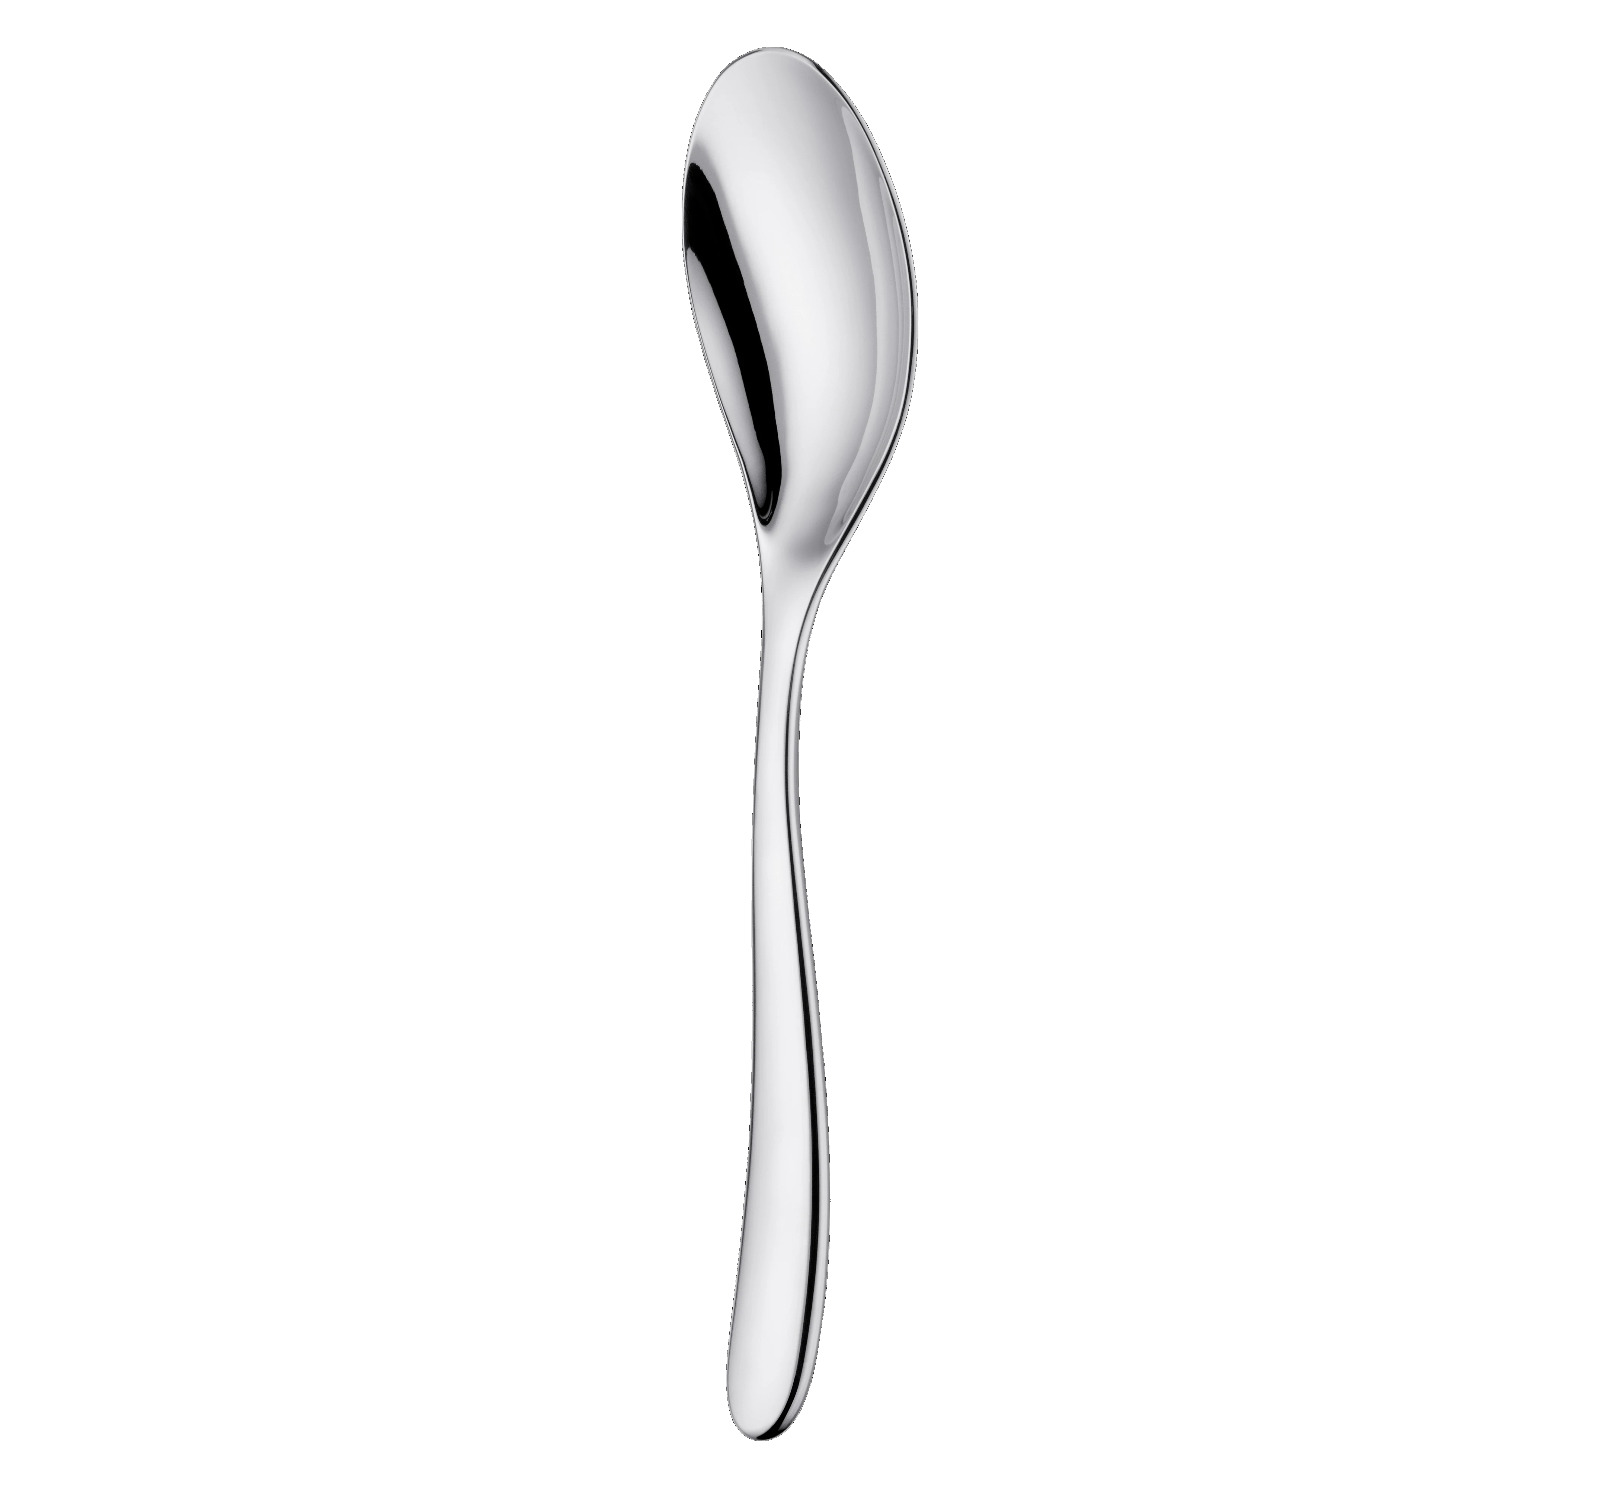 NEW CHRISTOFLE L'AME STAINLESS STEEL SERVING SPOON #2427006 BRAND NIB SAVE$ F/SH